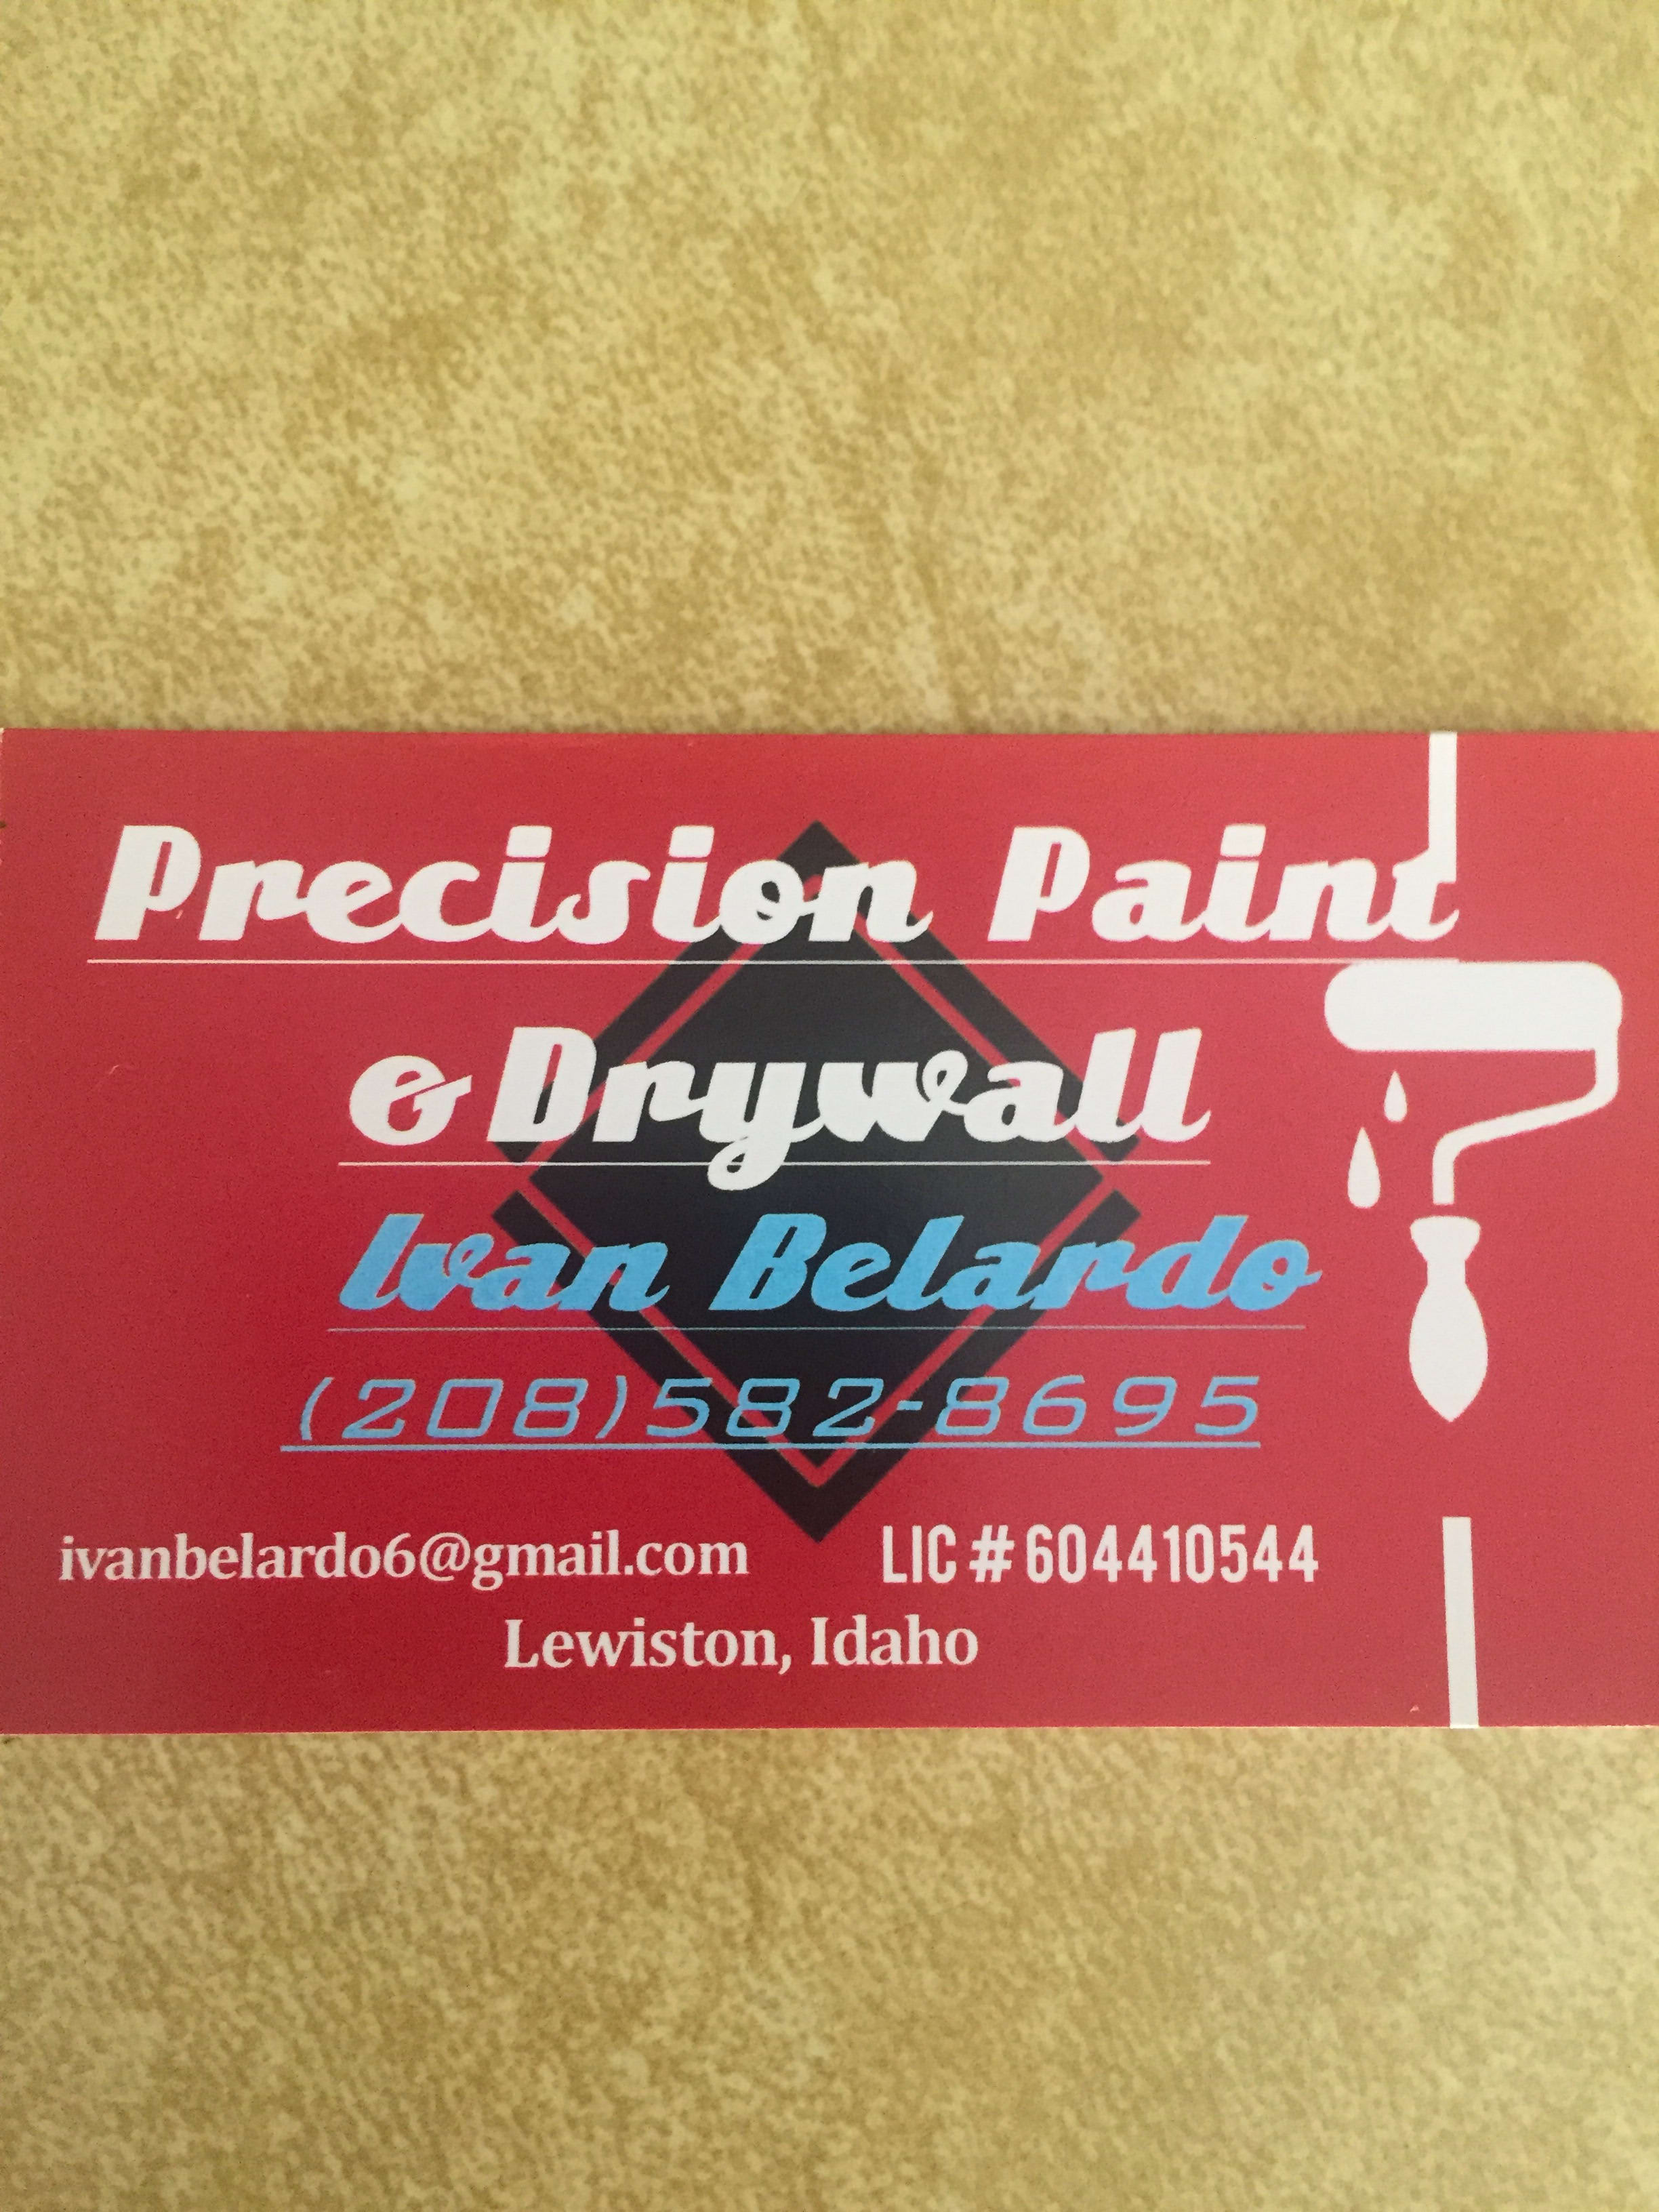 Precision Paint & Drywall